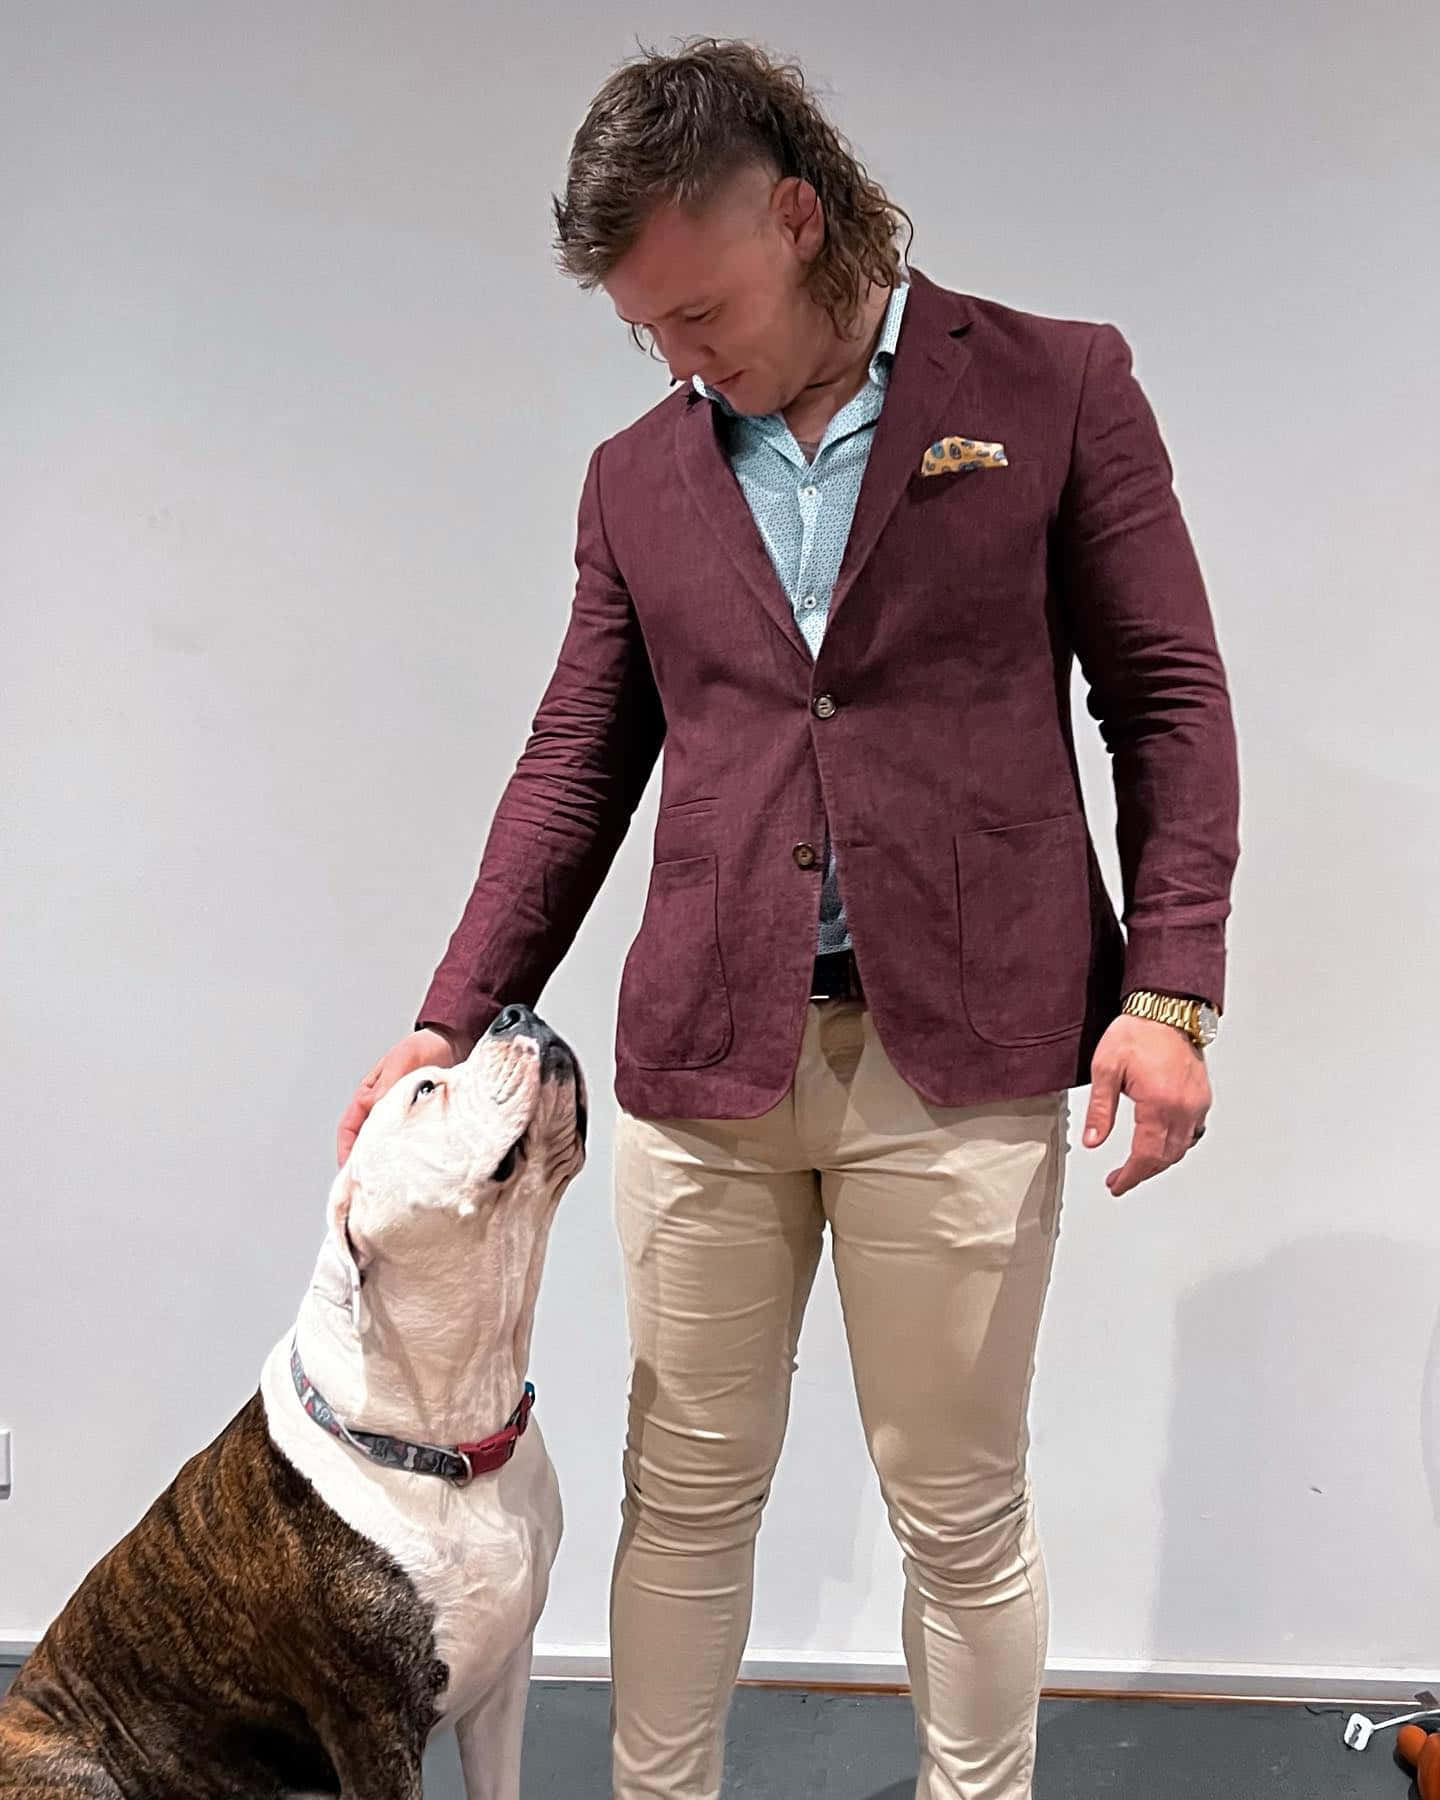 Jimmy Crute In A Suit Petting His Dog Wallpaper